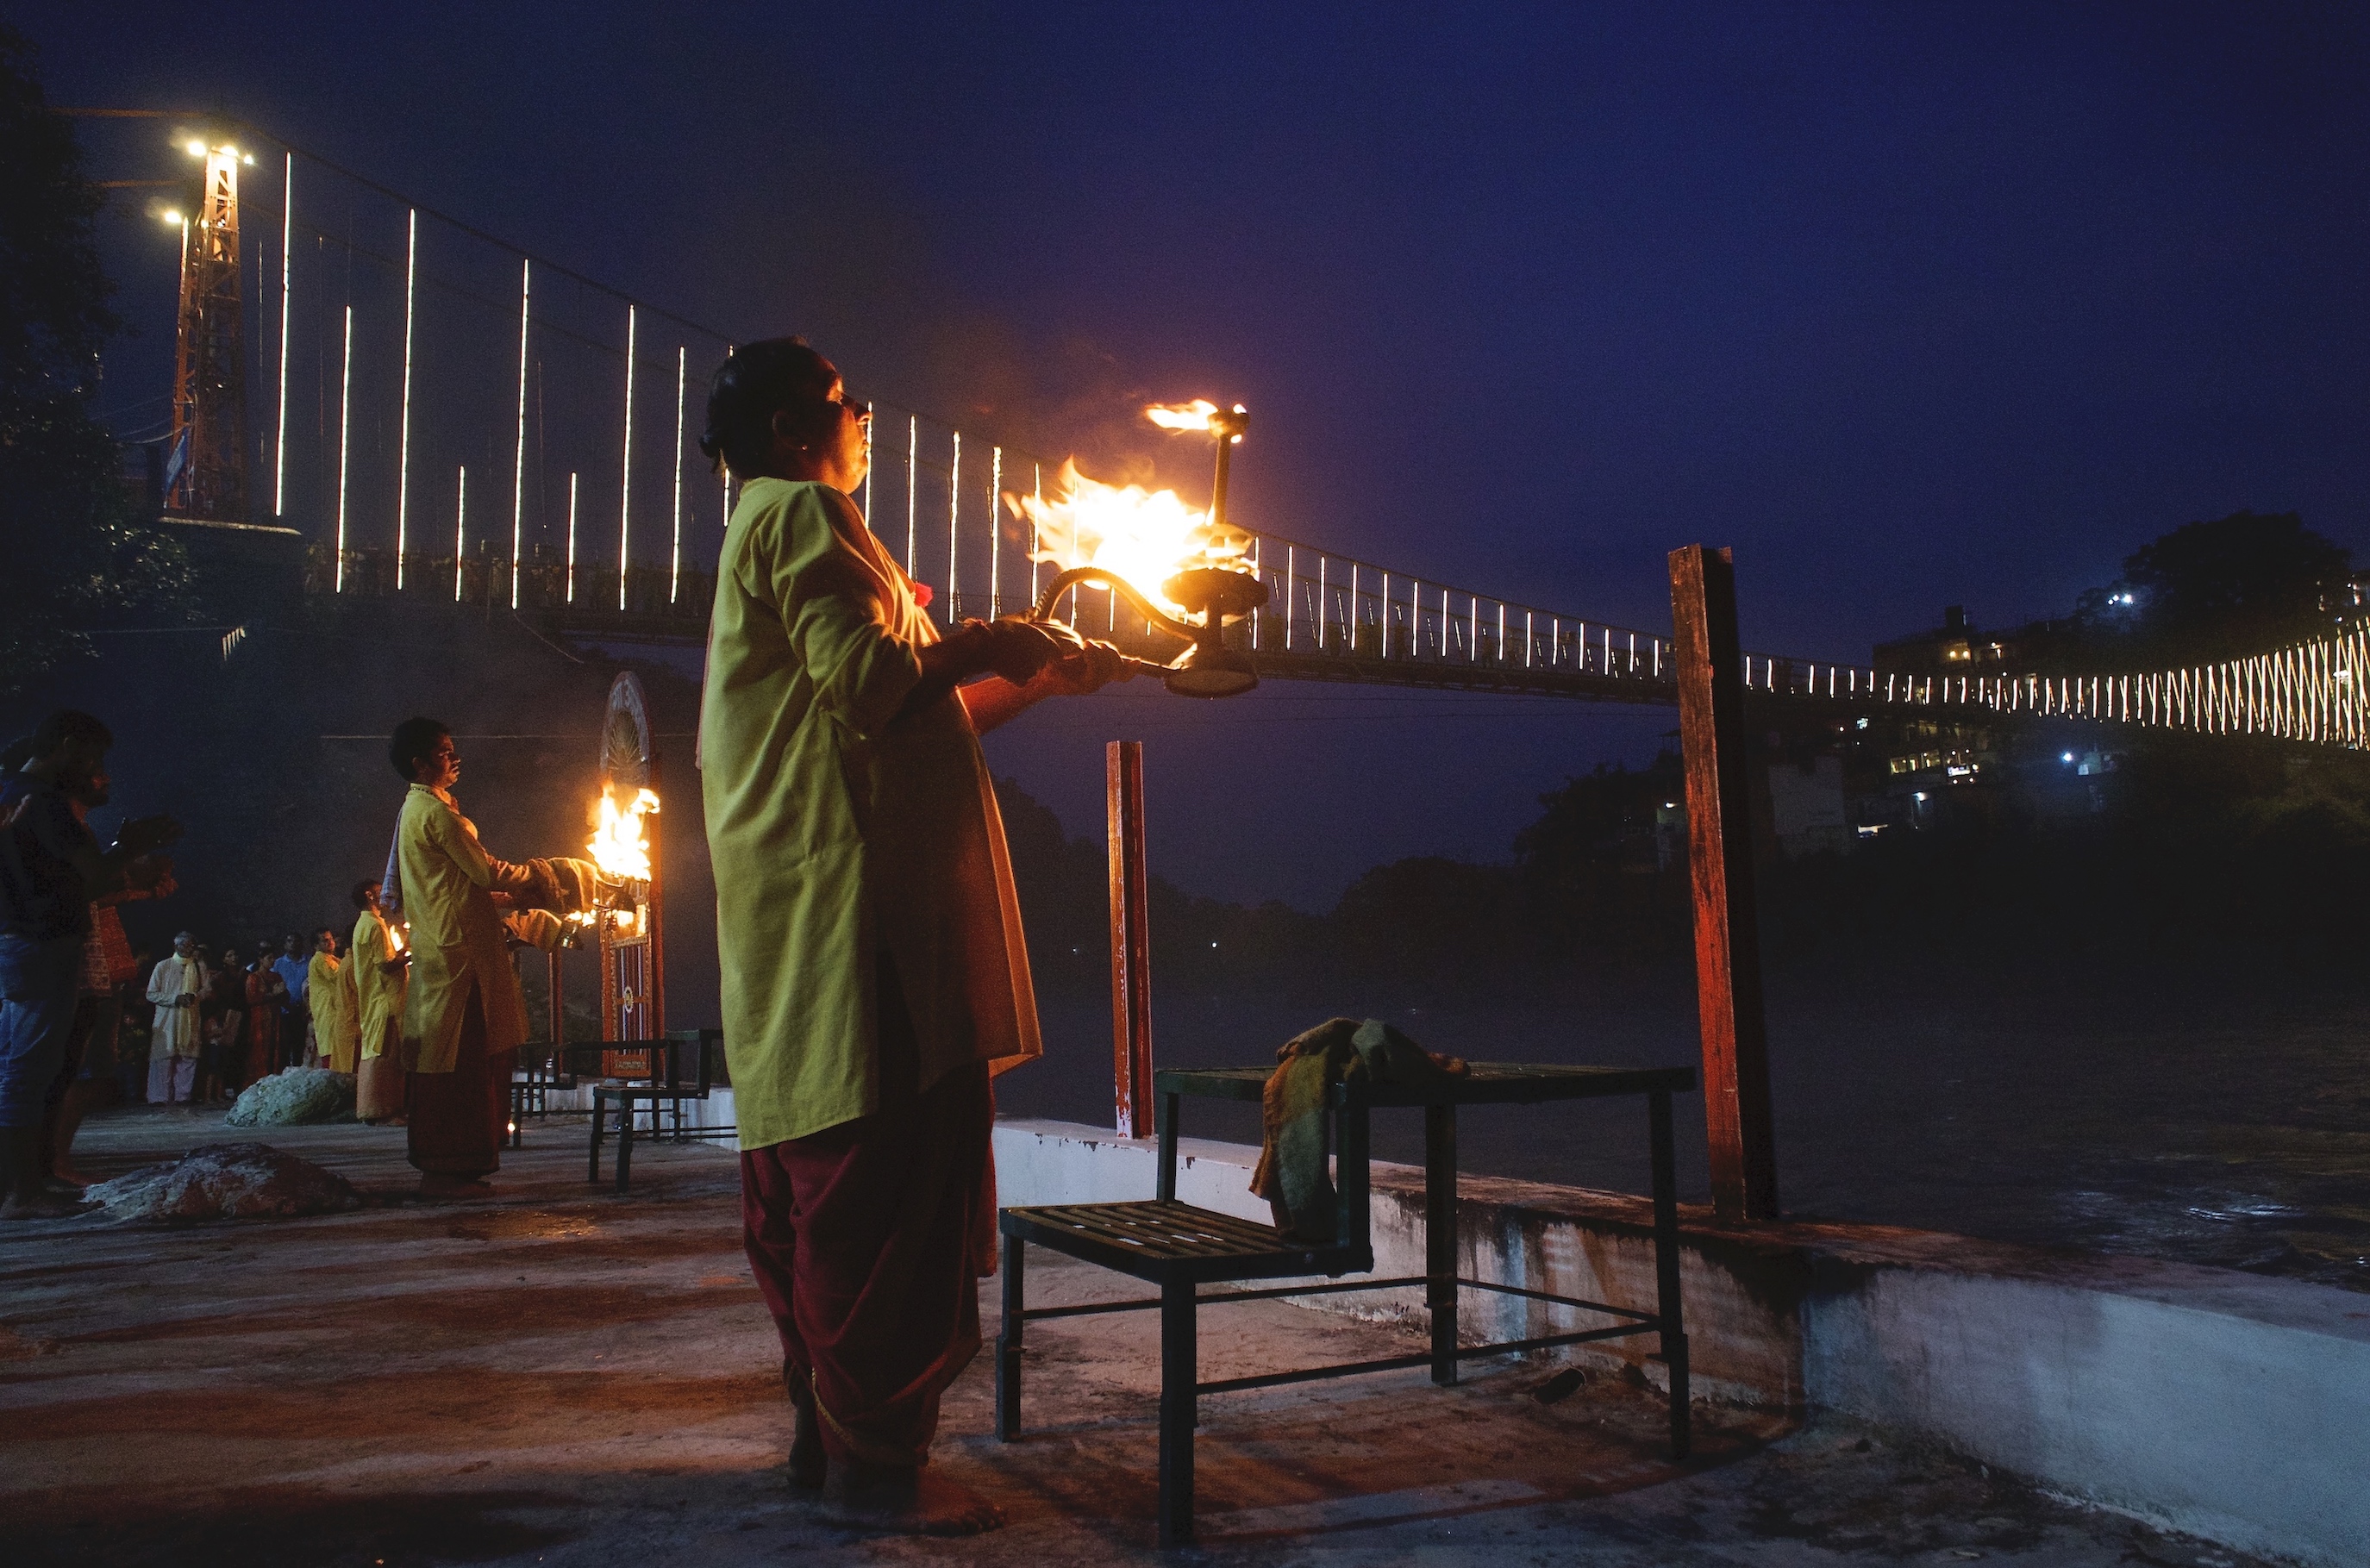 Gangaarti performed in many places in Rishikesh. Temple next to Laxman Jhoola (Bridge) conducts devotional ceremony by chanting mantras. They believe such sacred uttering with syllables makes the place energized.